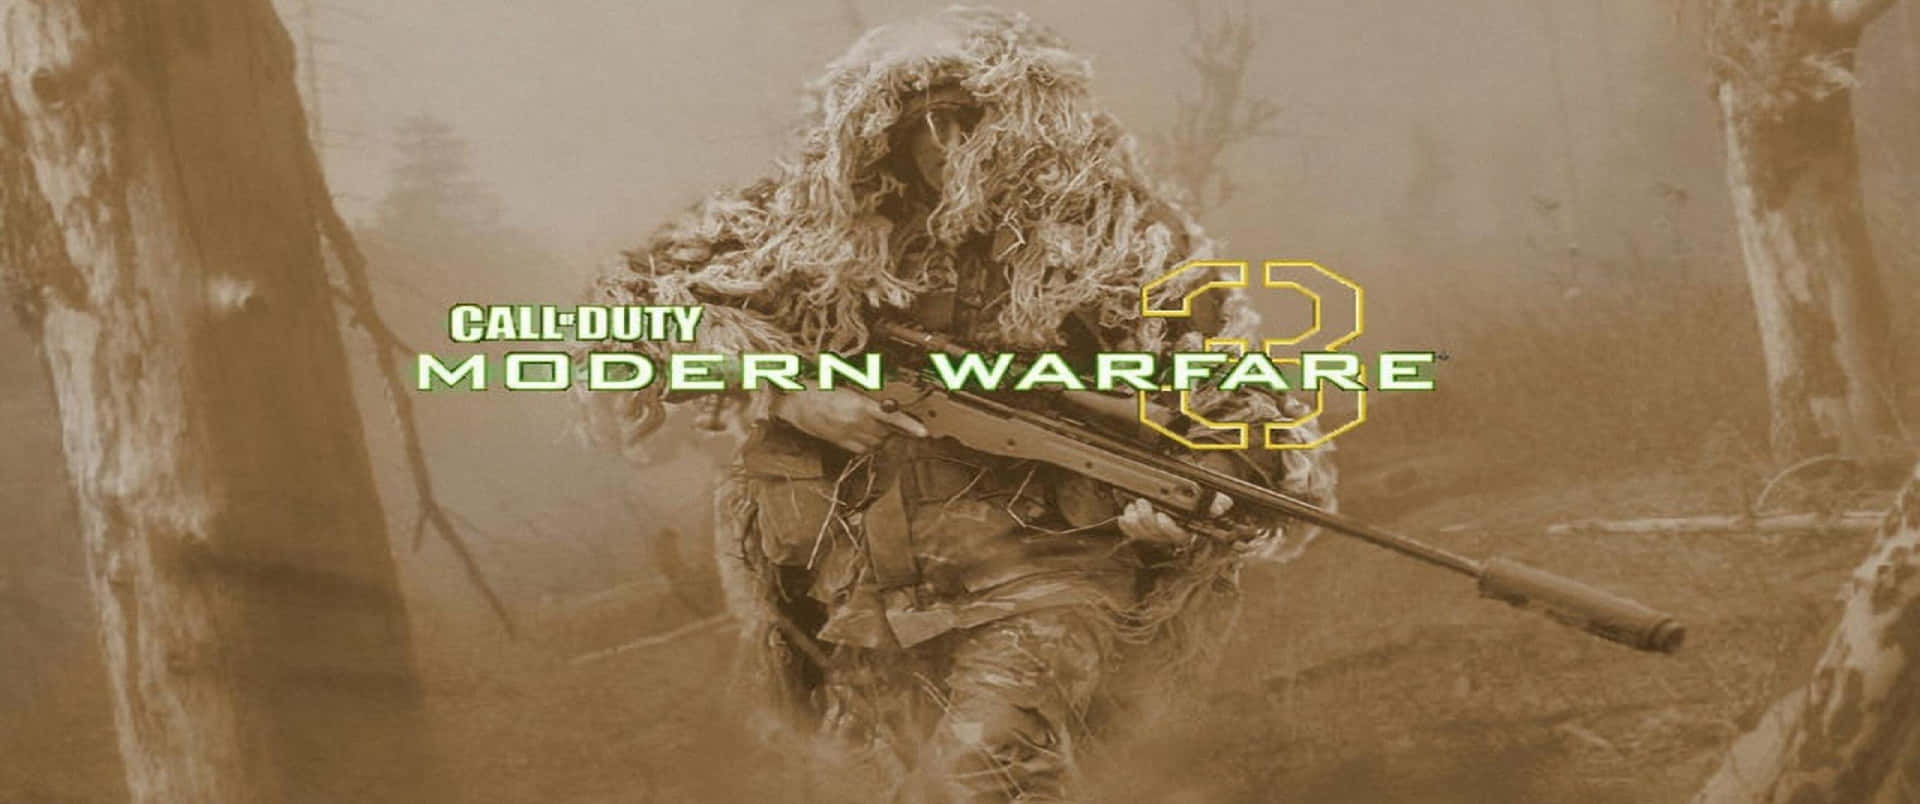 Soldier With Camouflage Net 3440x1440p Call Of Duty Modern Warfare Background